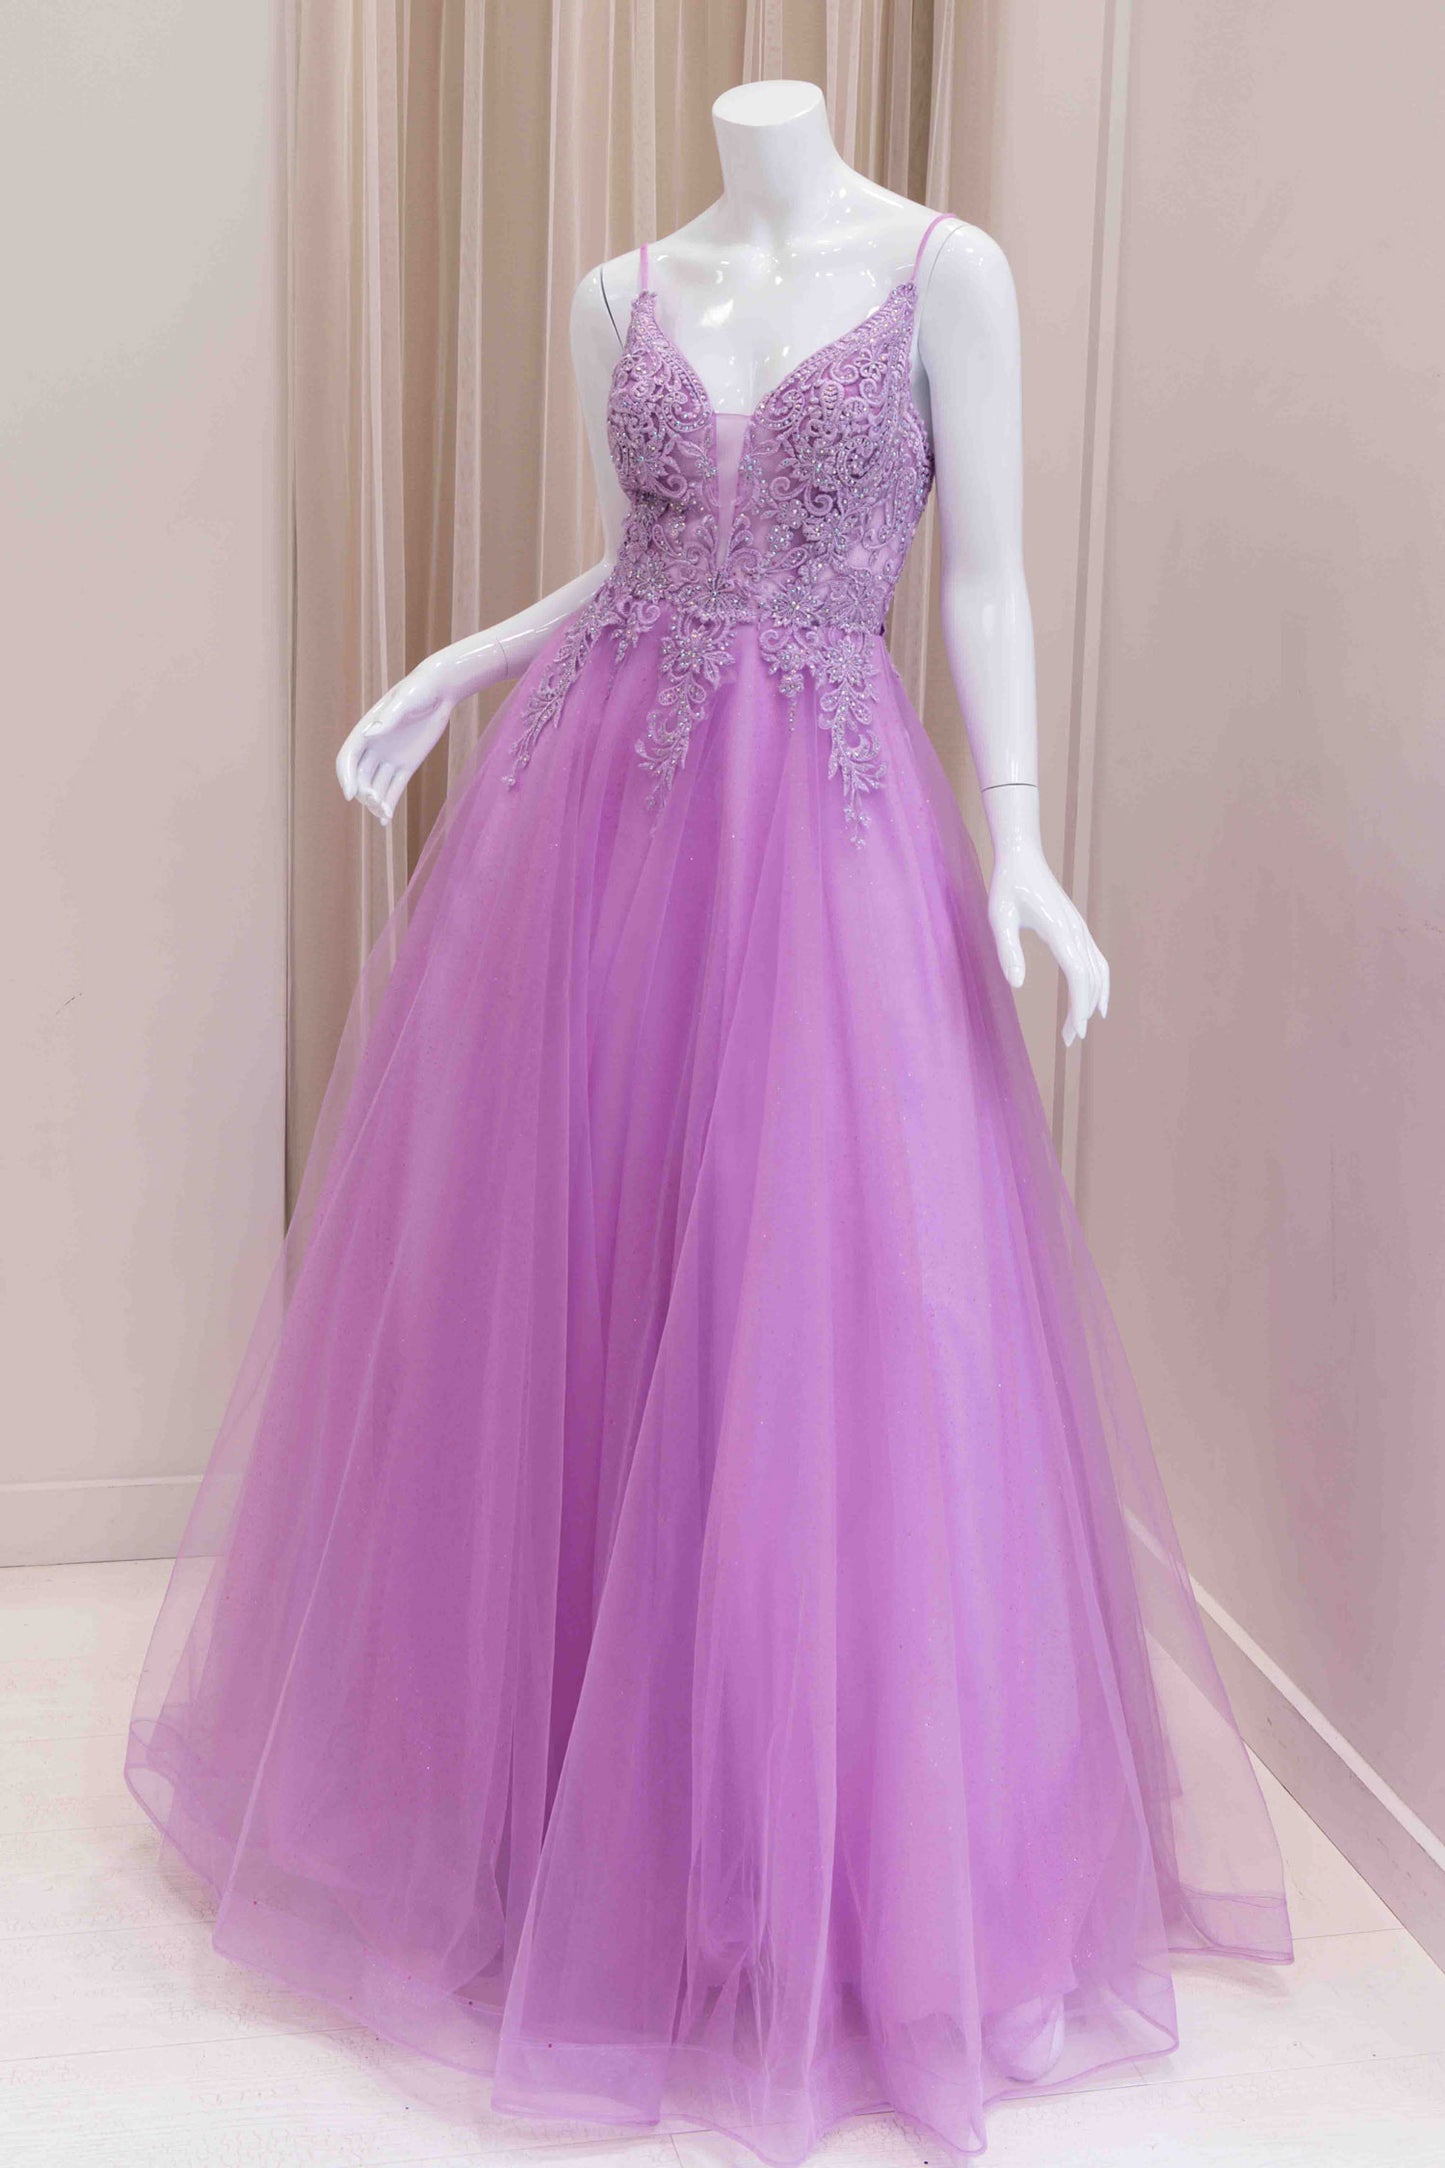 Everleigh Embroidered Bodice Ball Gown in Lilac